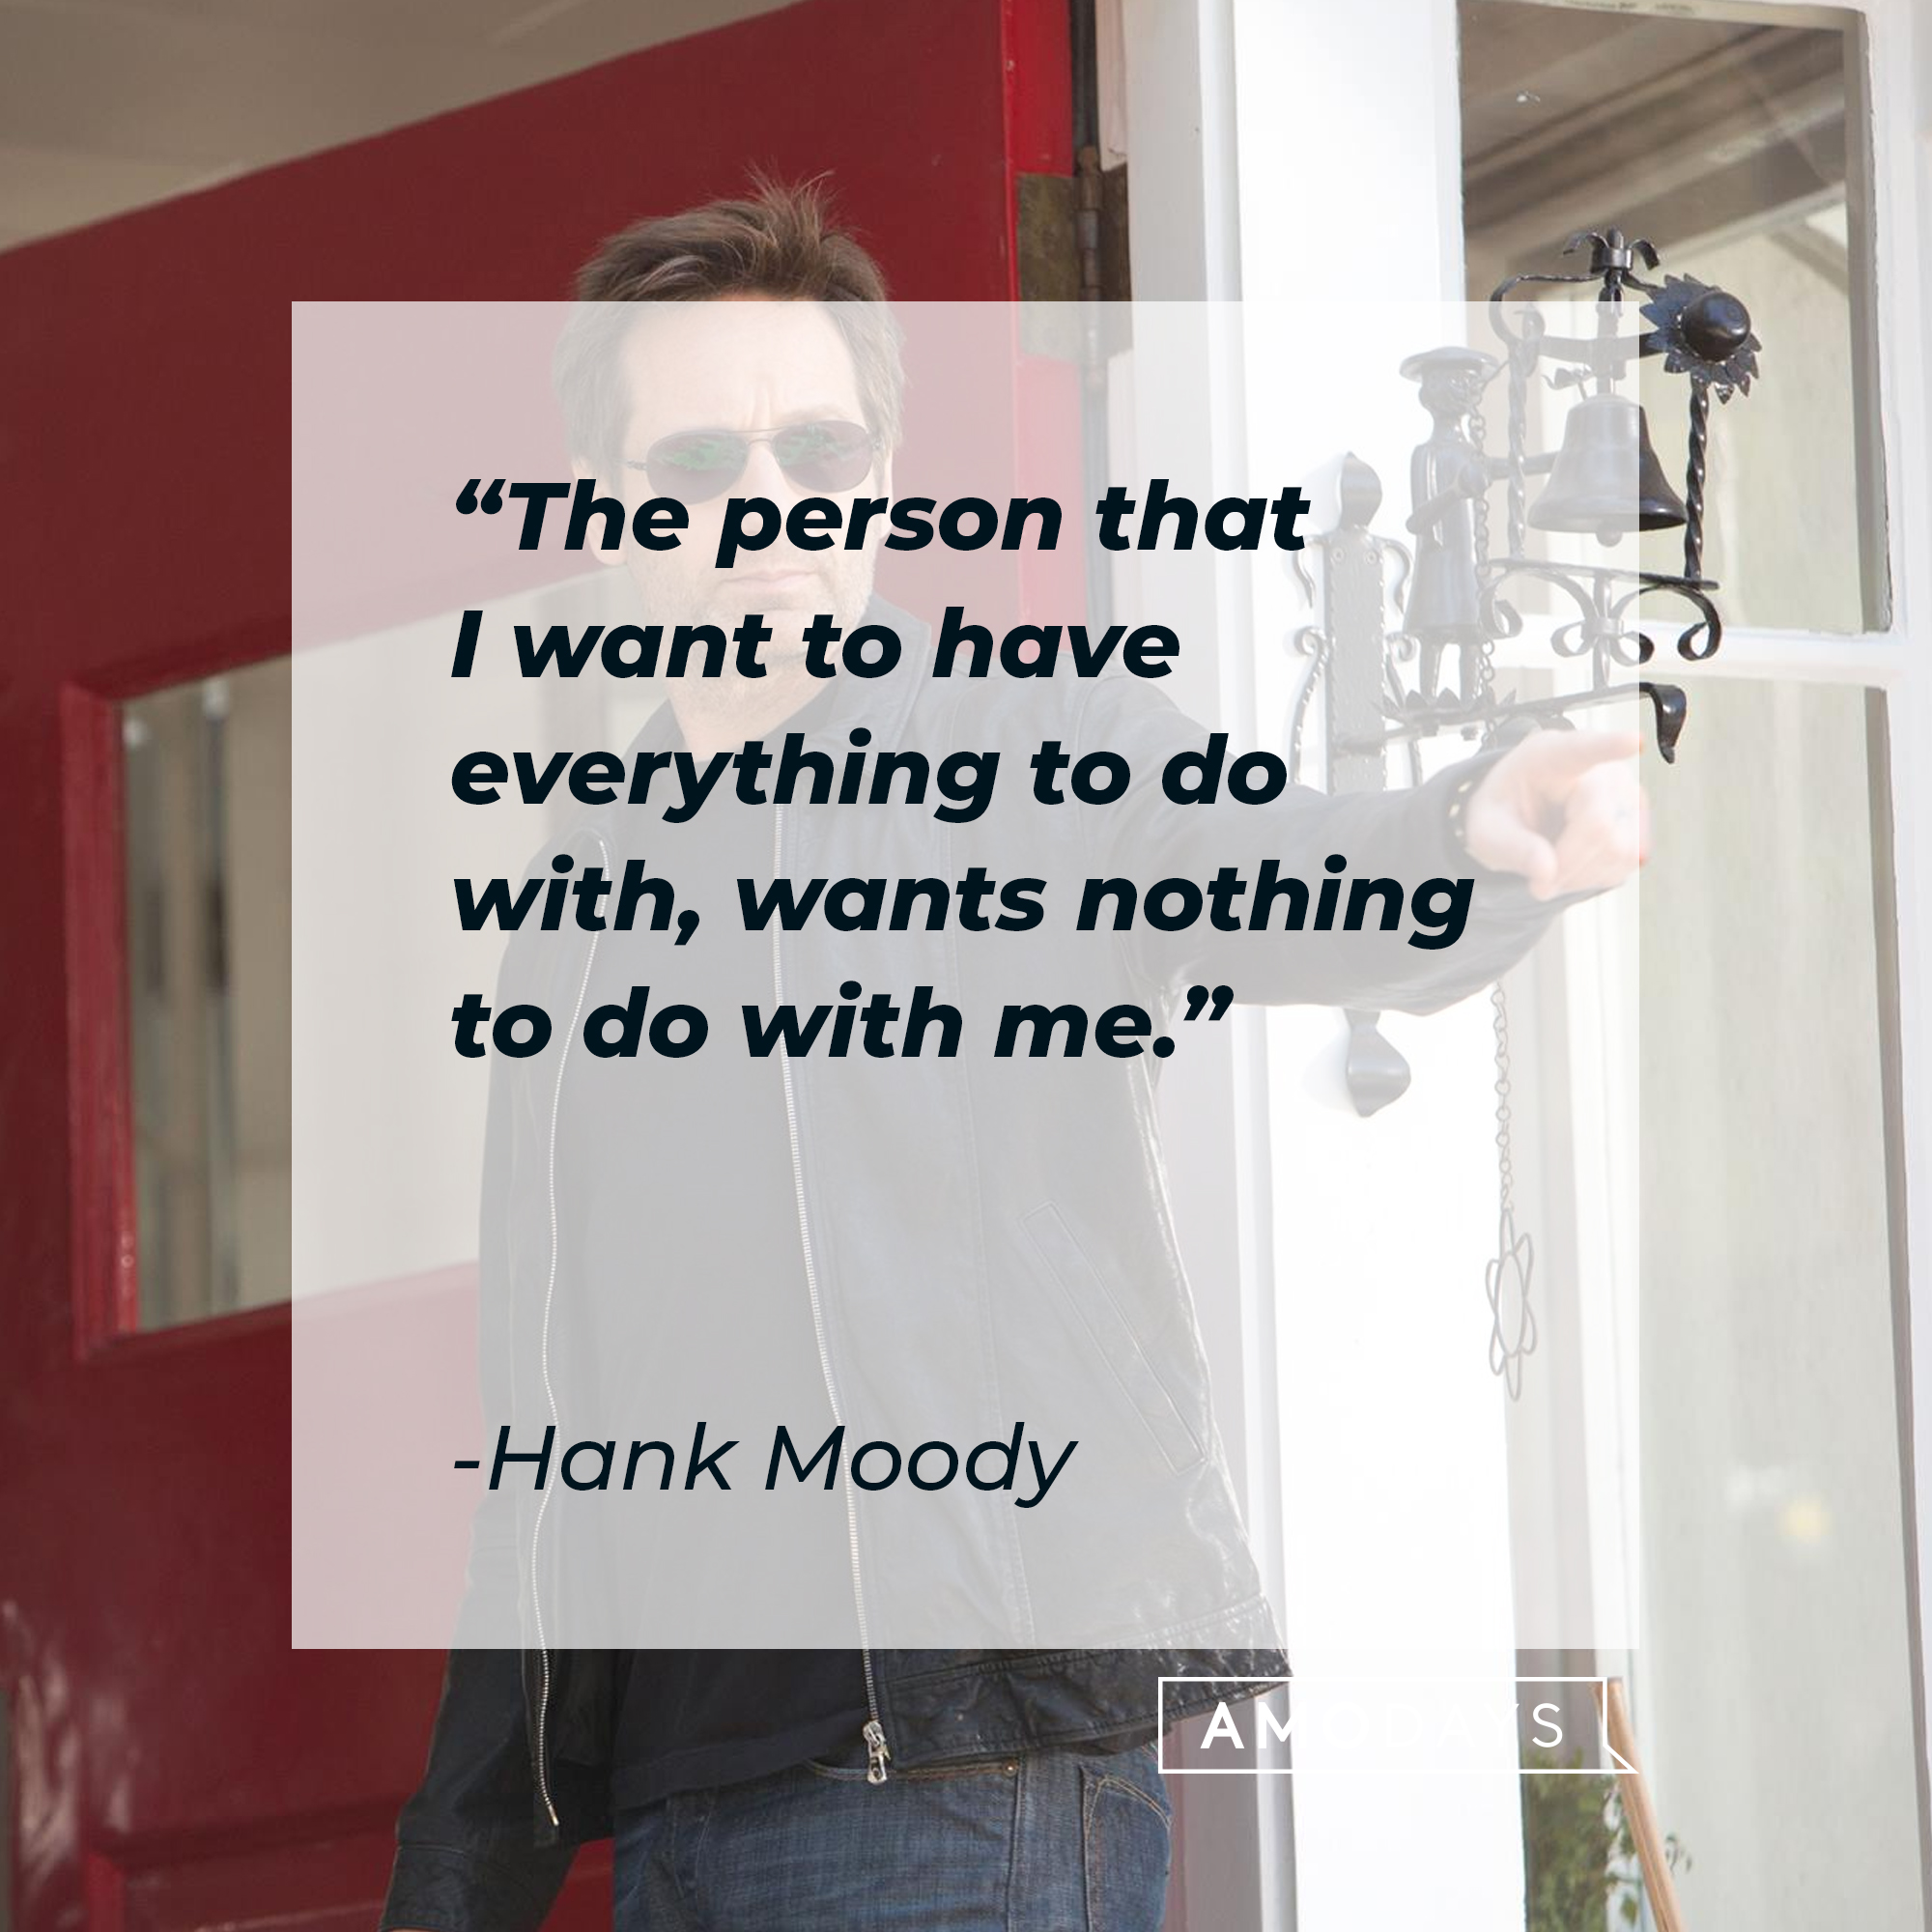 Hank Moody's quote: "The person that I want to have everything to do with, wants nothing to do with me." | Image: AmoDays